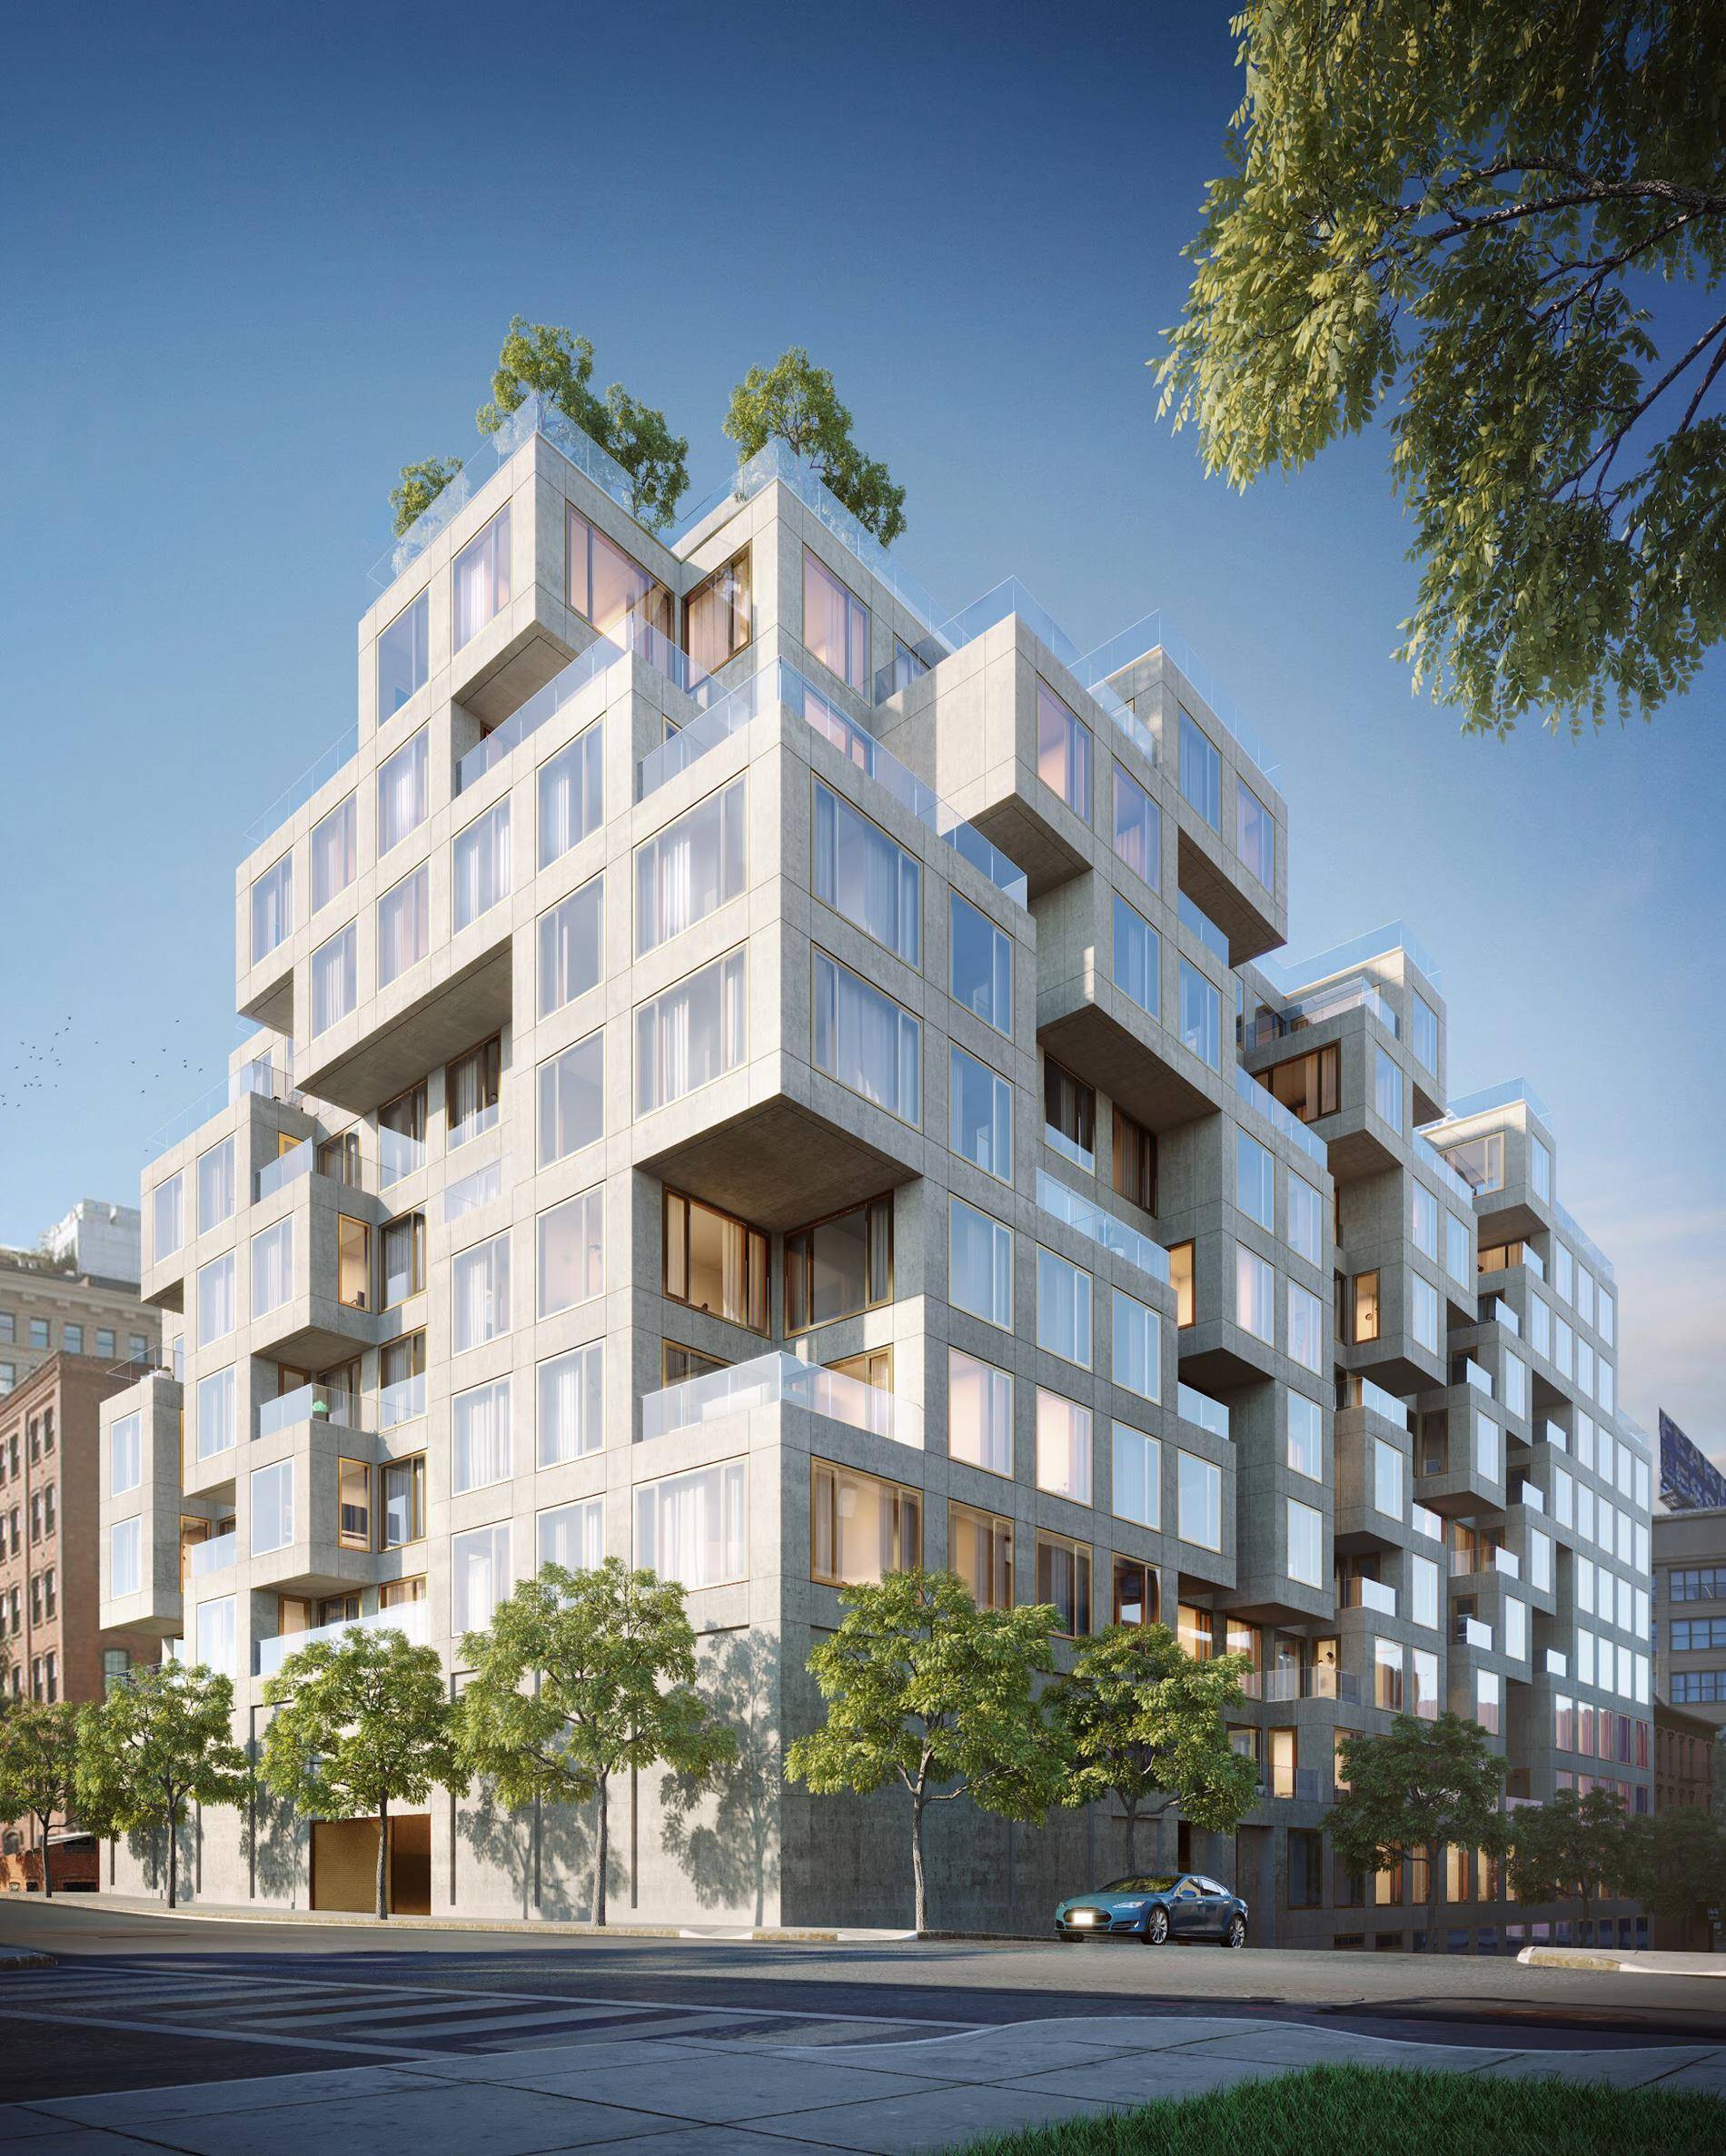 Unbeatable value for a new condo, you will not find this price in prime Dumbo, superior to any resale property and non existing in a new development !